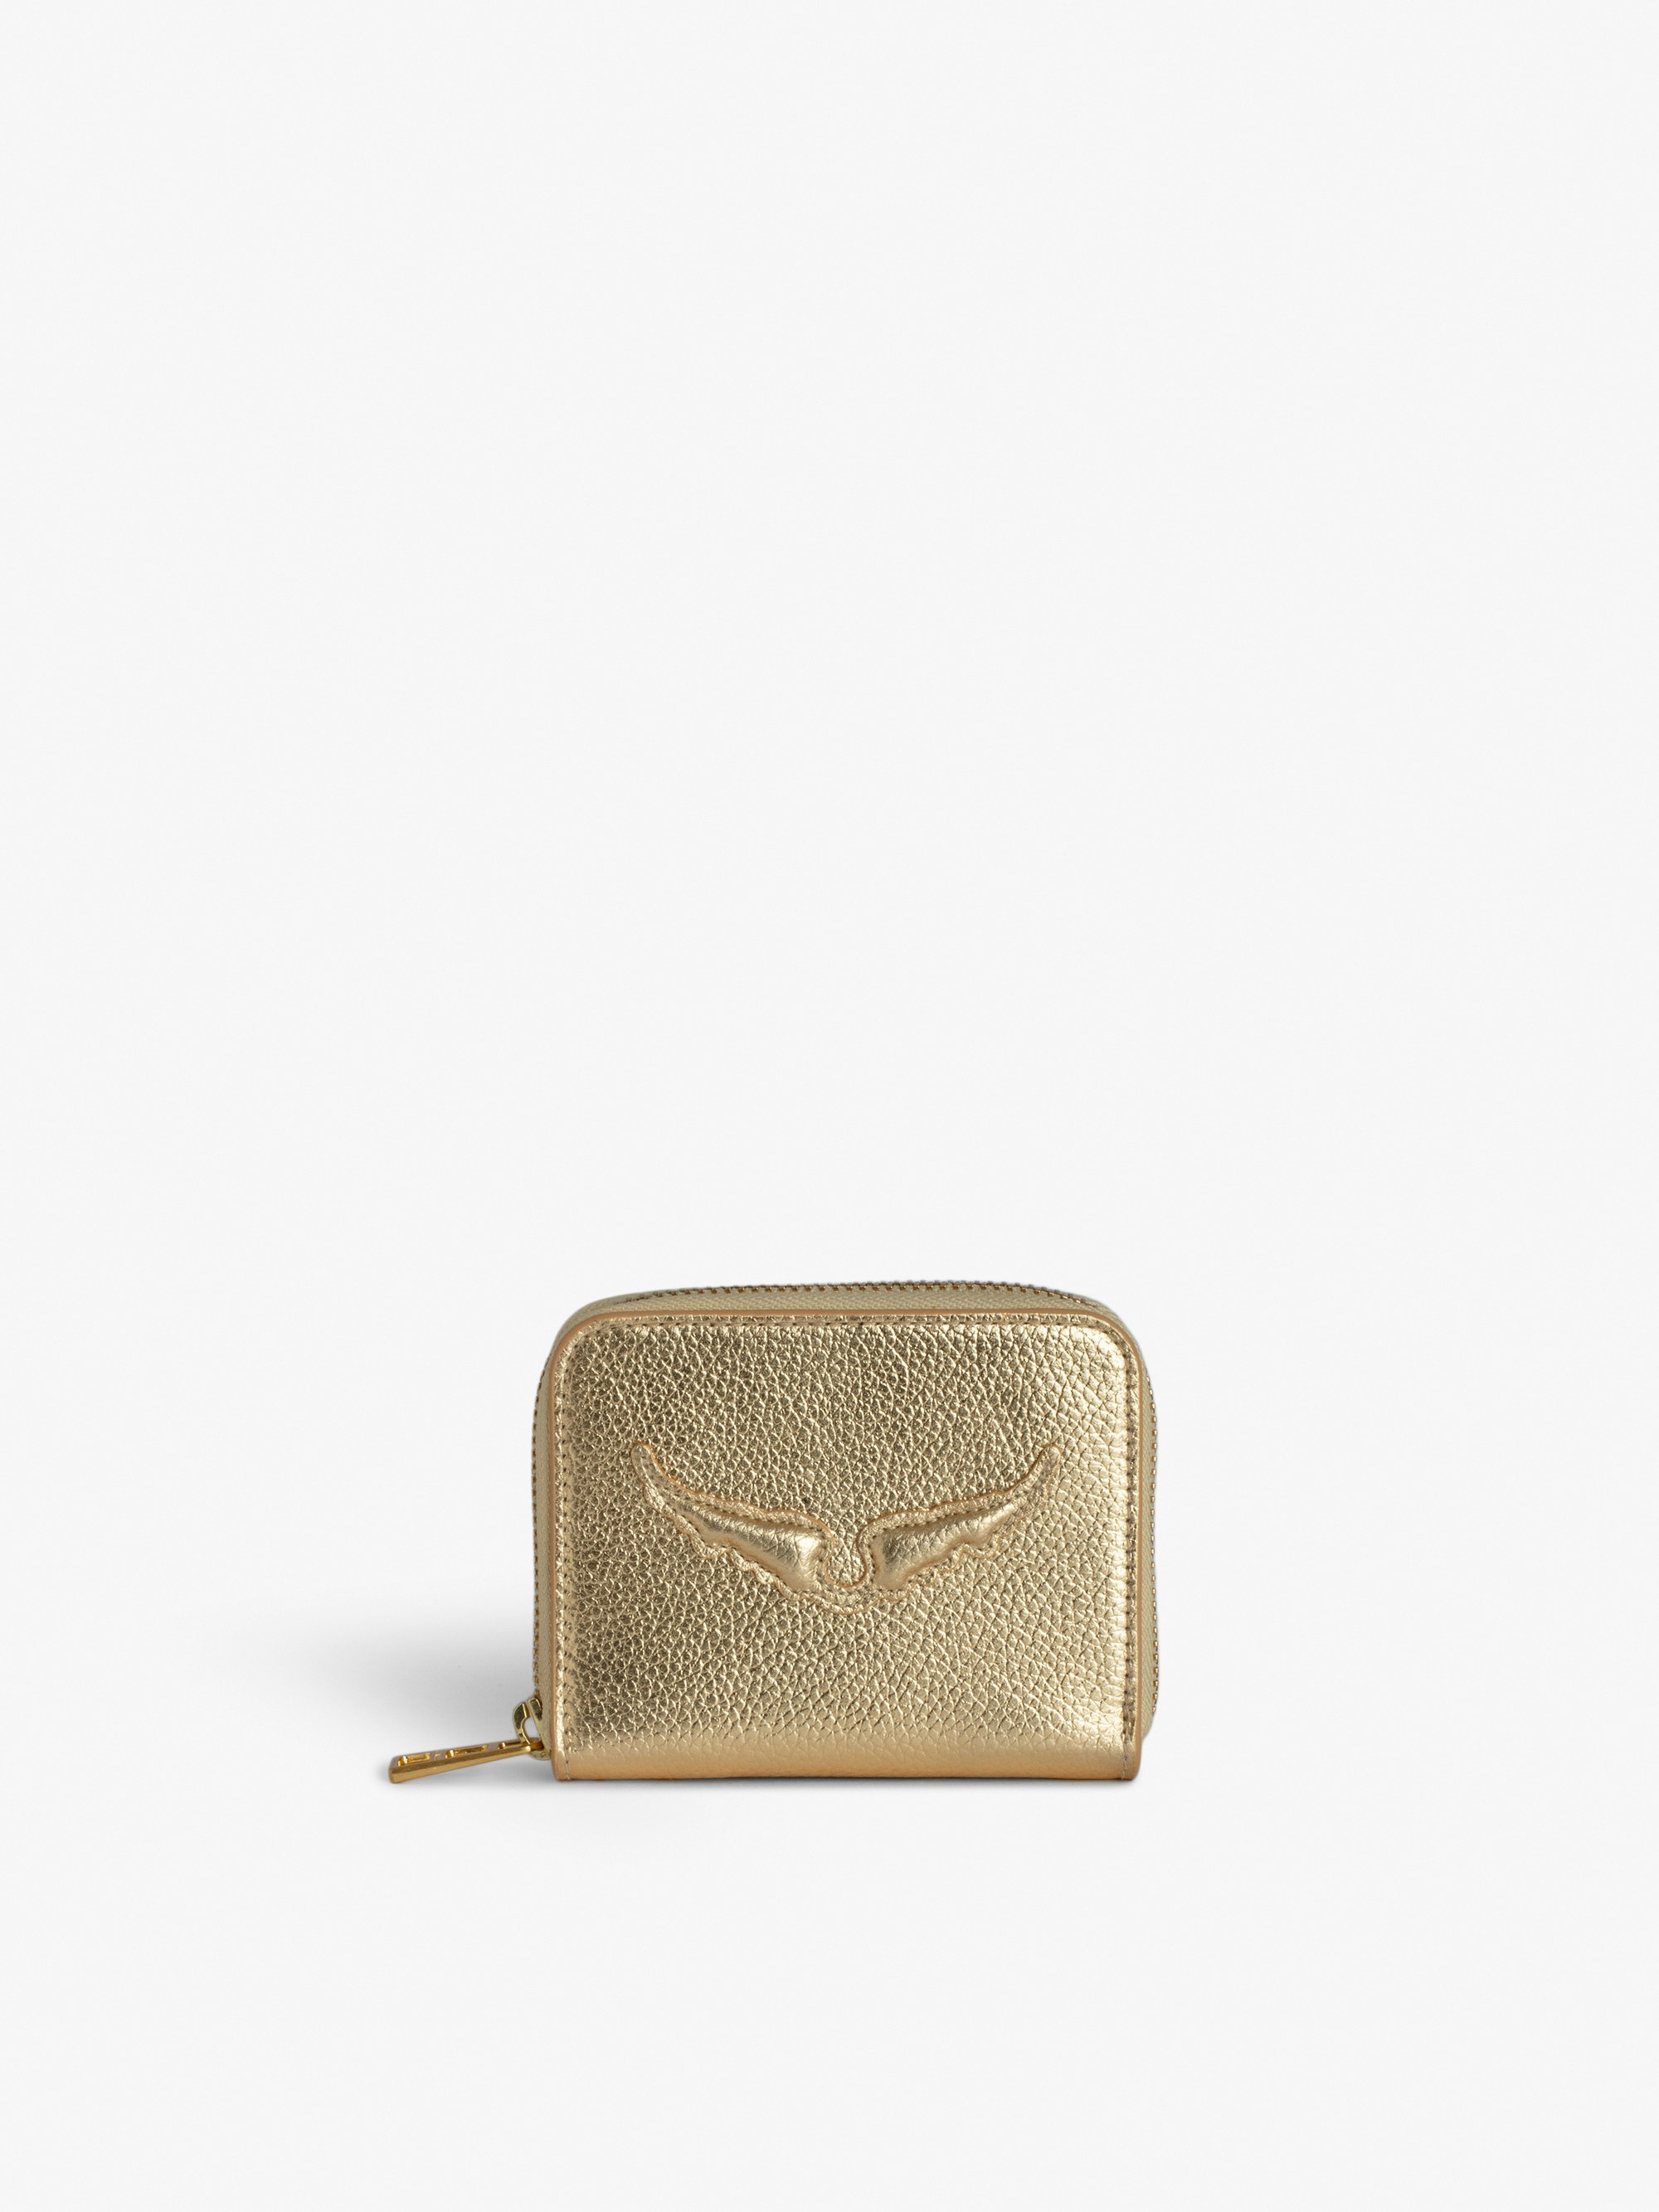 Mini ZV Coin Purse - Coin purse in metallic gold grained leather with embossed wings signature.